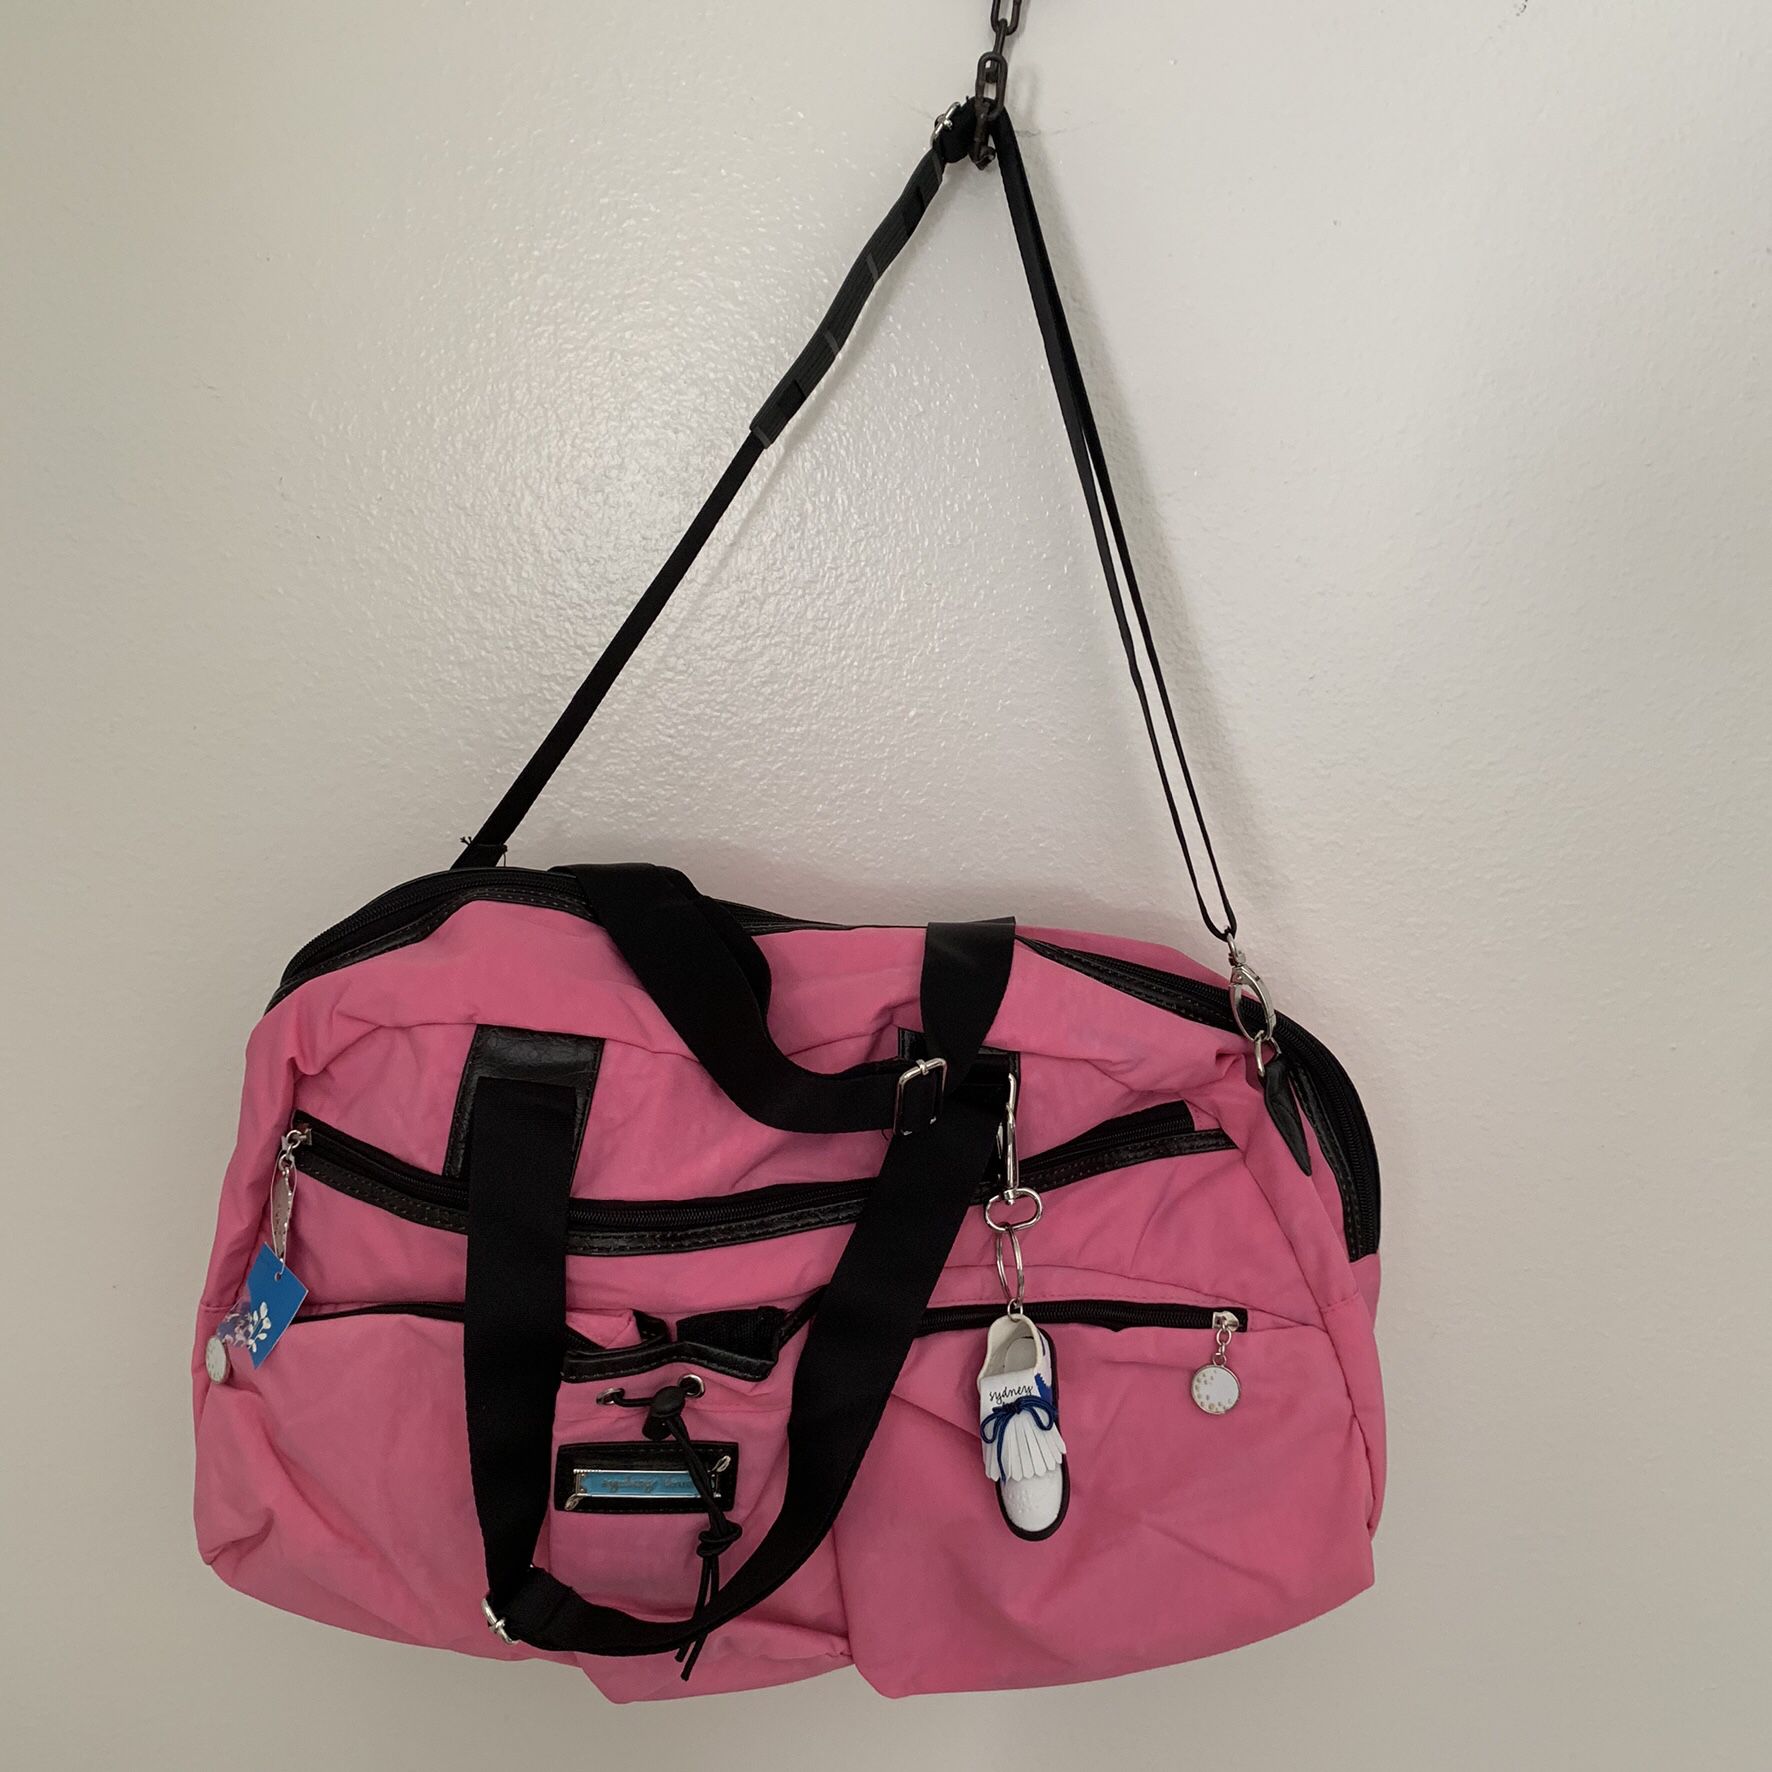 Sydney Love pink golf duffle bag with charms 21X12x9” New